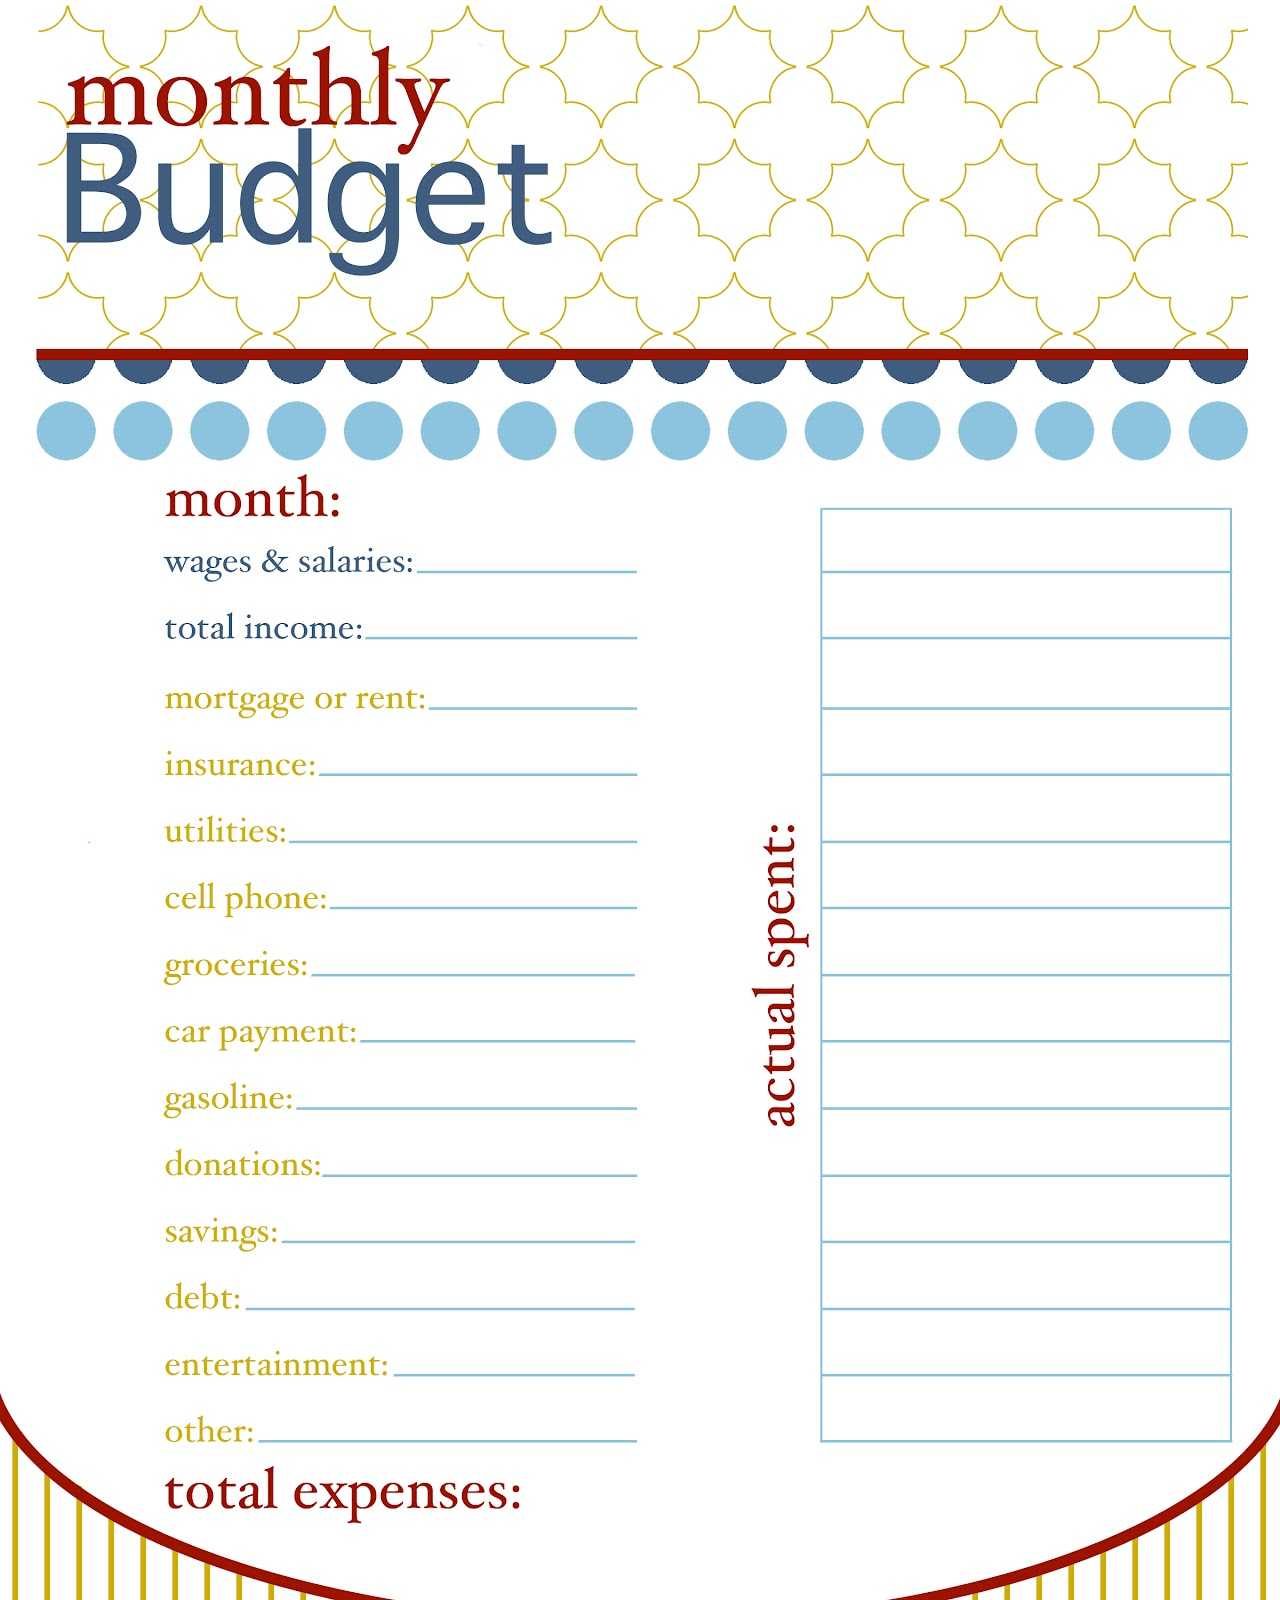 Budget Planning Worksheets Pdf as Well as Sissyprint Daily Planner organization